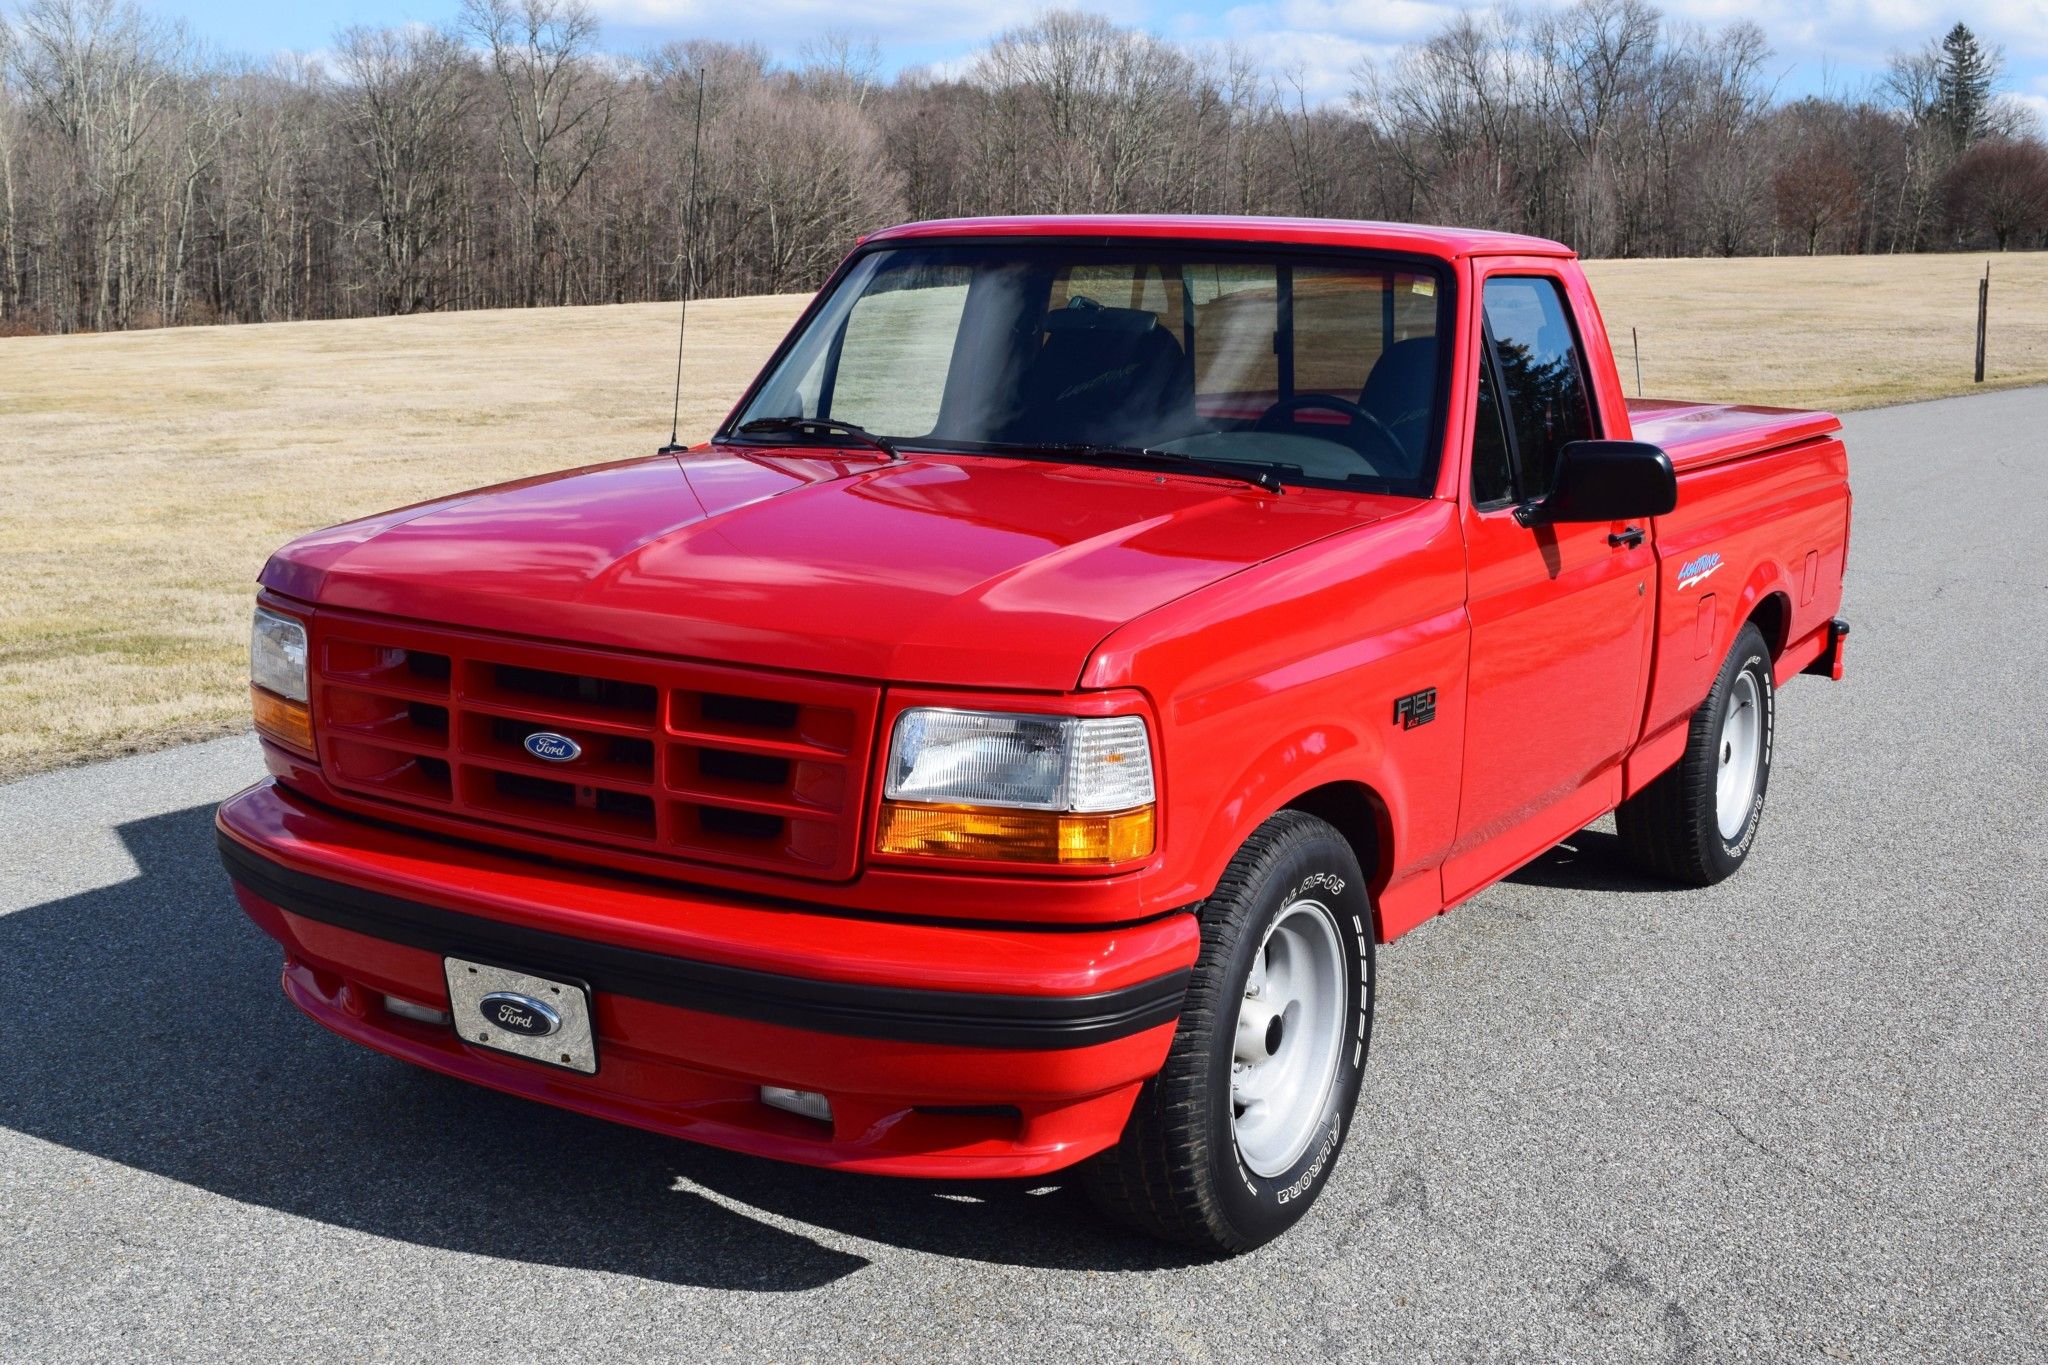 Red Ford F-150 Lightning outdoors on road